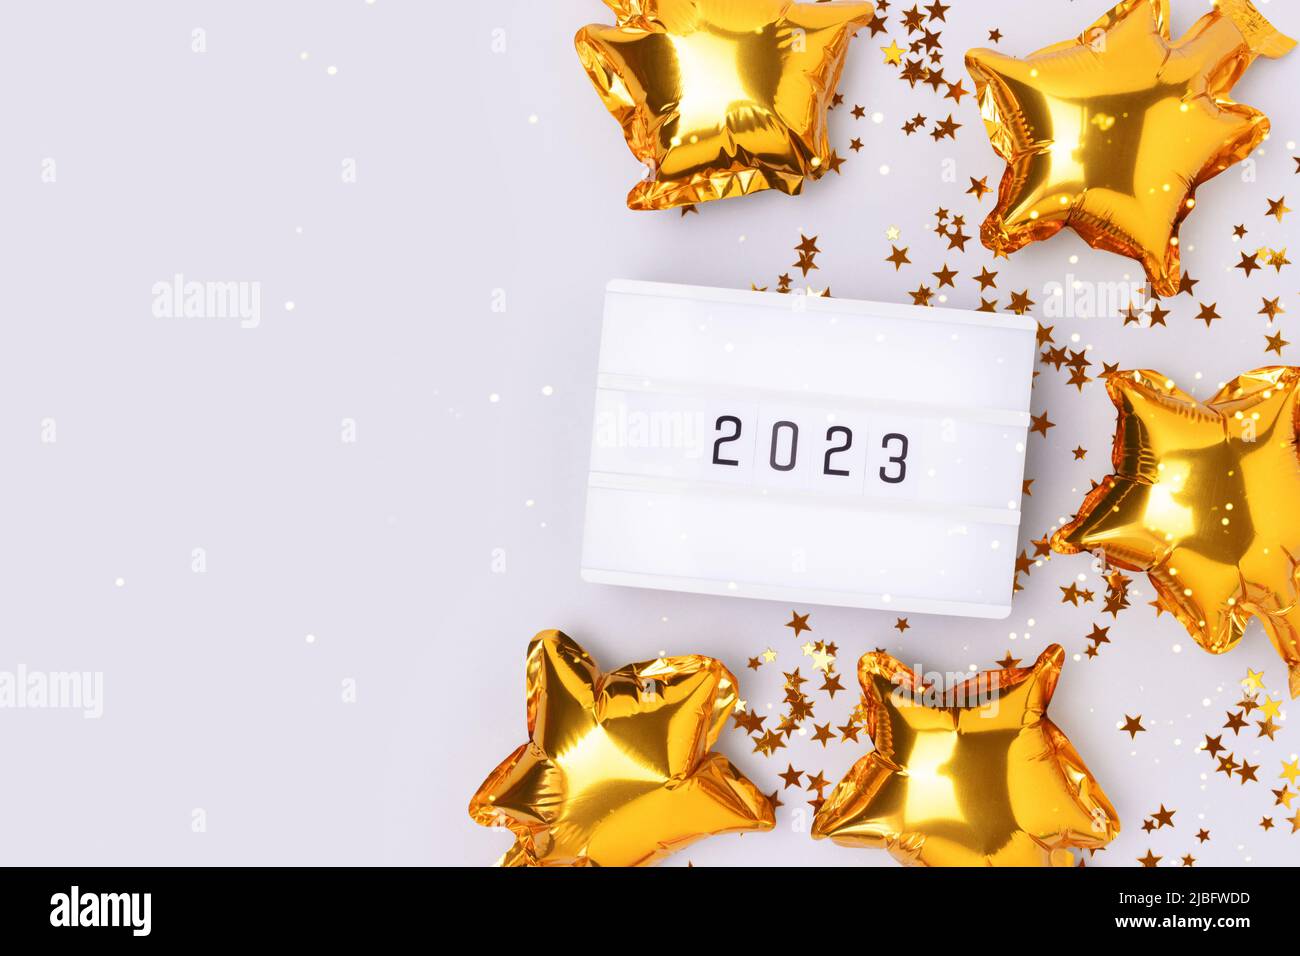 Lightbox with 2023 numbers on a blue background with copy space. Golden confetti and stars foil balloons. Stock Photo